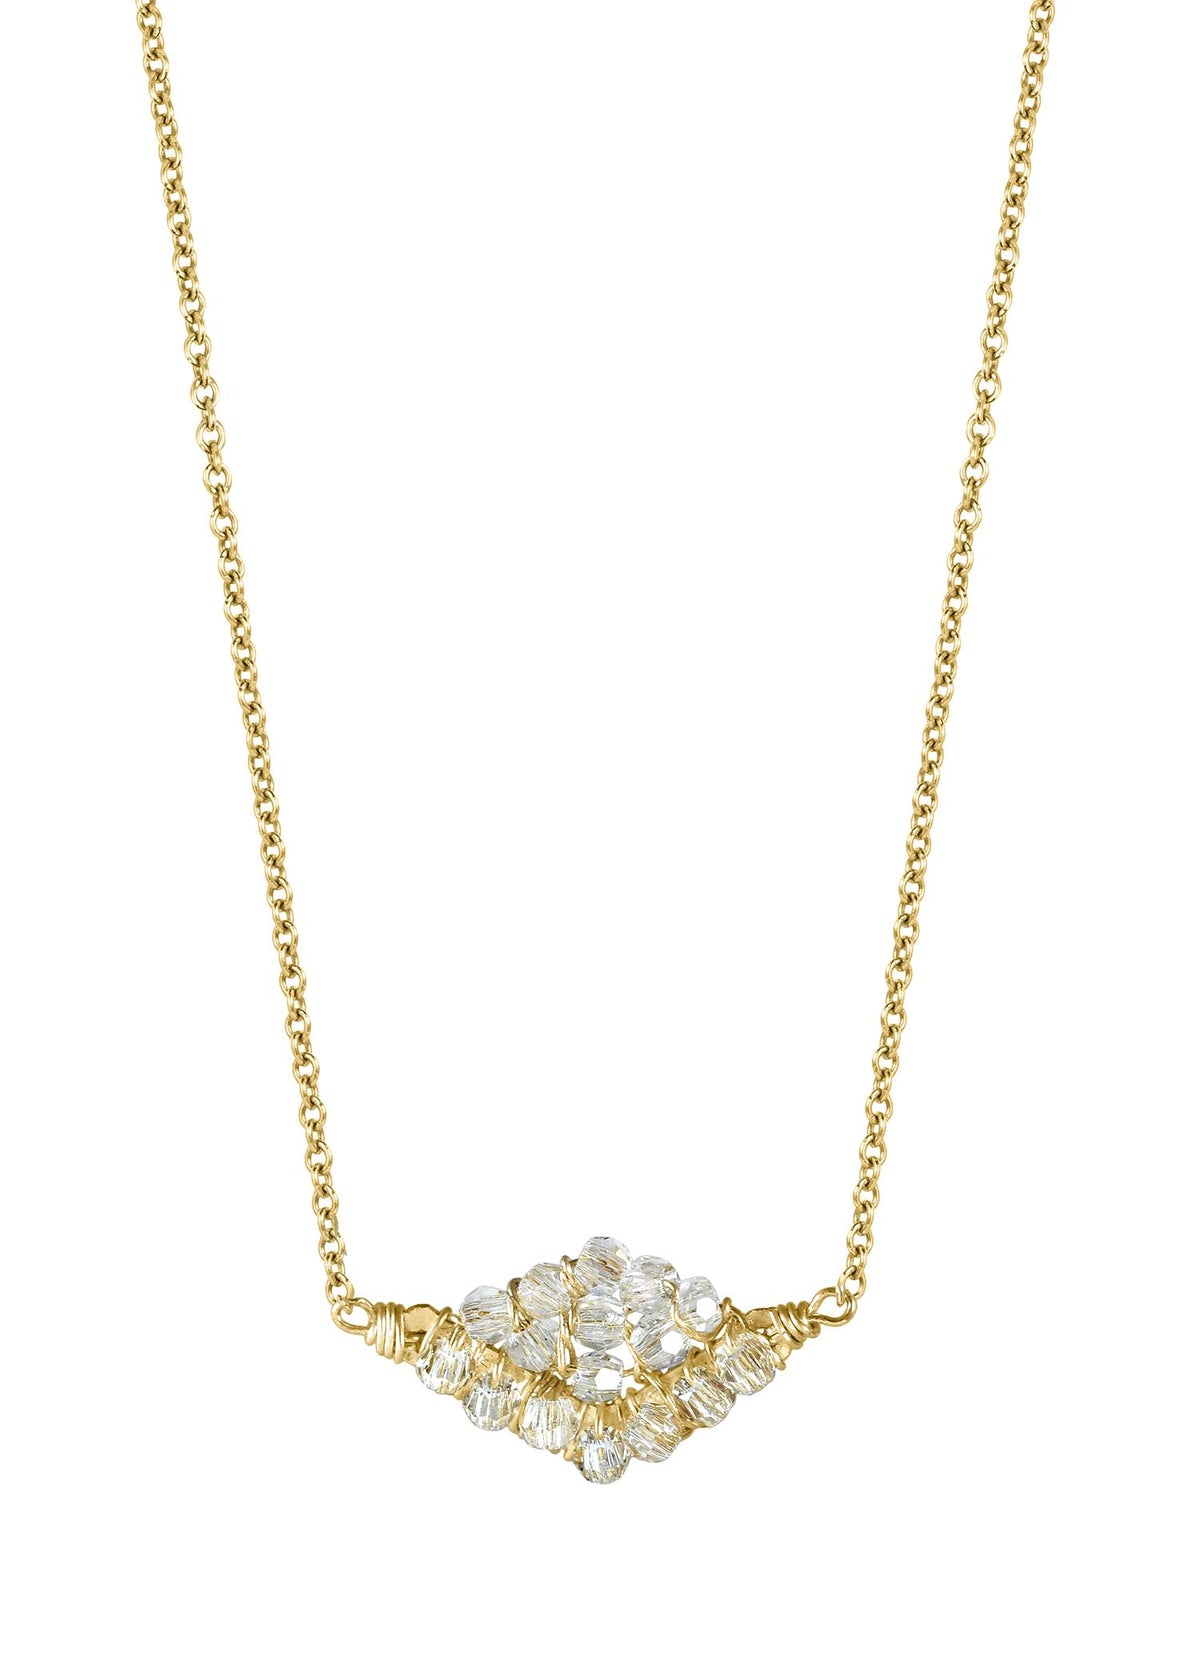 Crystal 14k gold fill Necklace measures 17” in length Pendant measures 5/16” in length and 1/2” in width Handmade in our Los Angeles studio